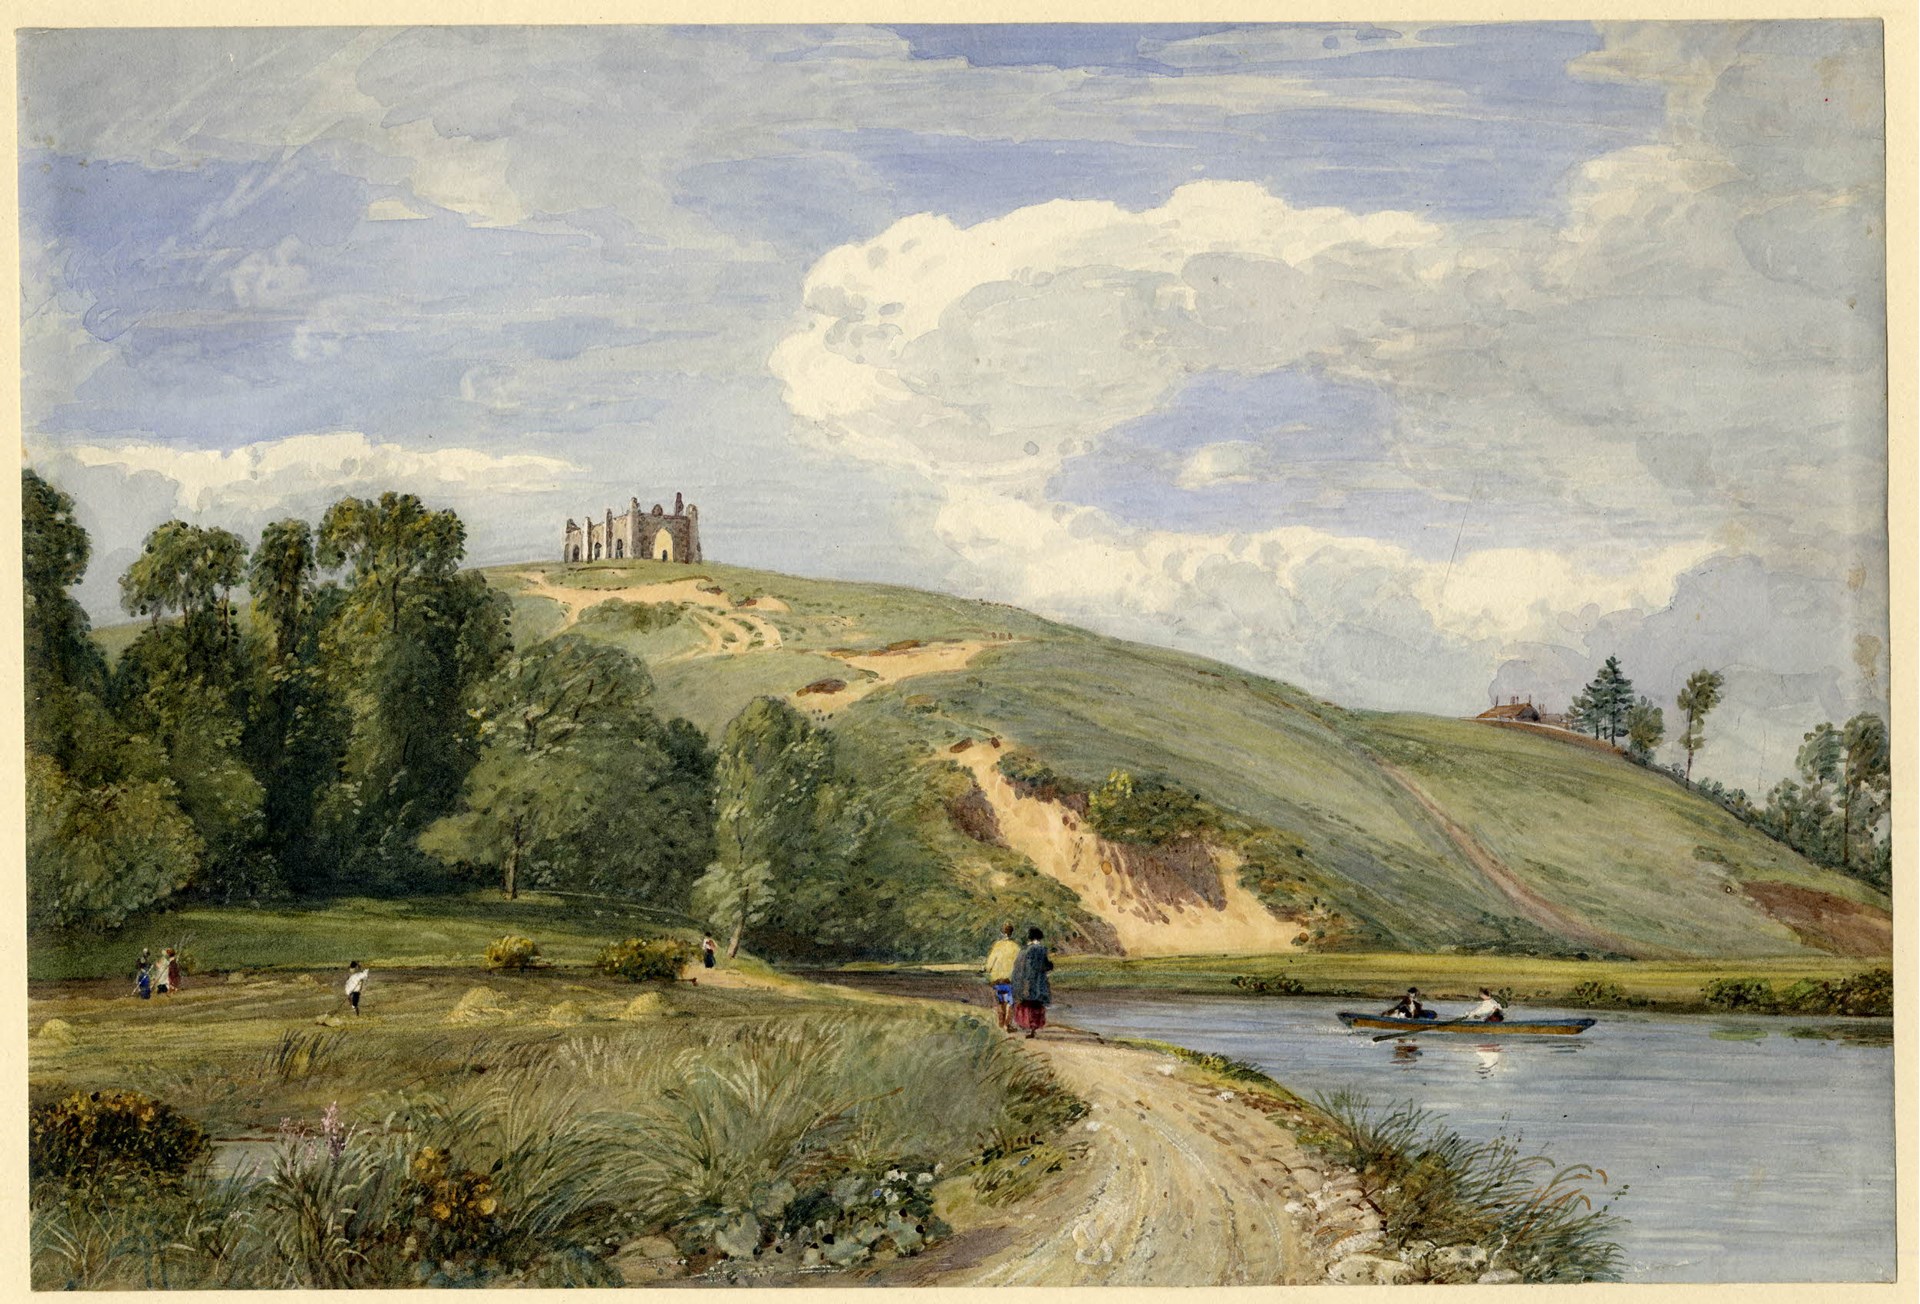 This lovely watercolour of St Catherine's Hill viewed from the meadows is by a rather more obscure artist, Francis Oliver Finch (1802 - 1862), and is reproduced by permission of the British Museum.